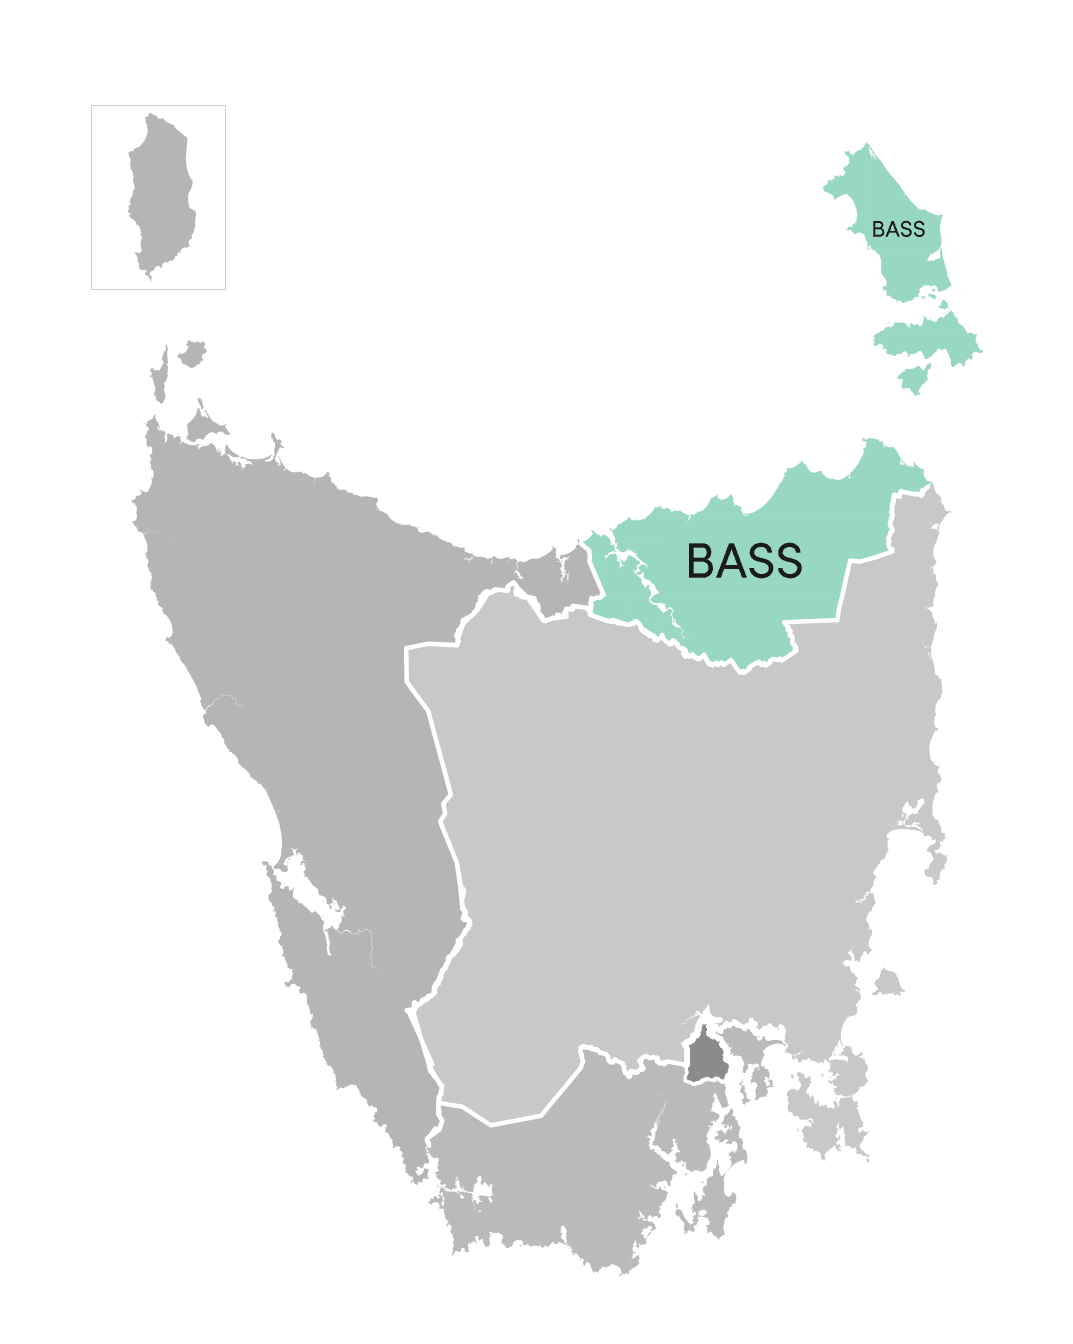 Bass division highlighted on illustrated map of Tasmania